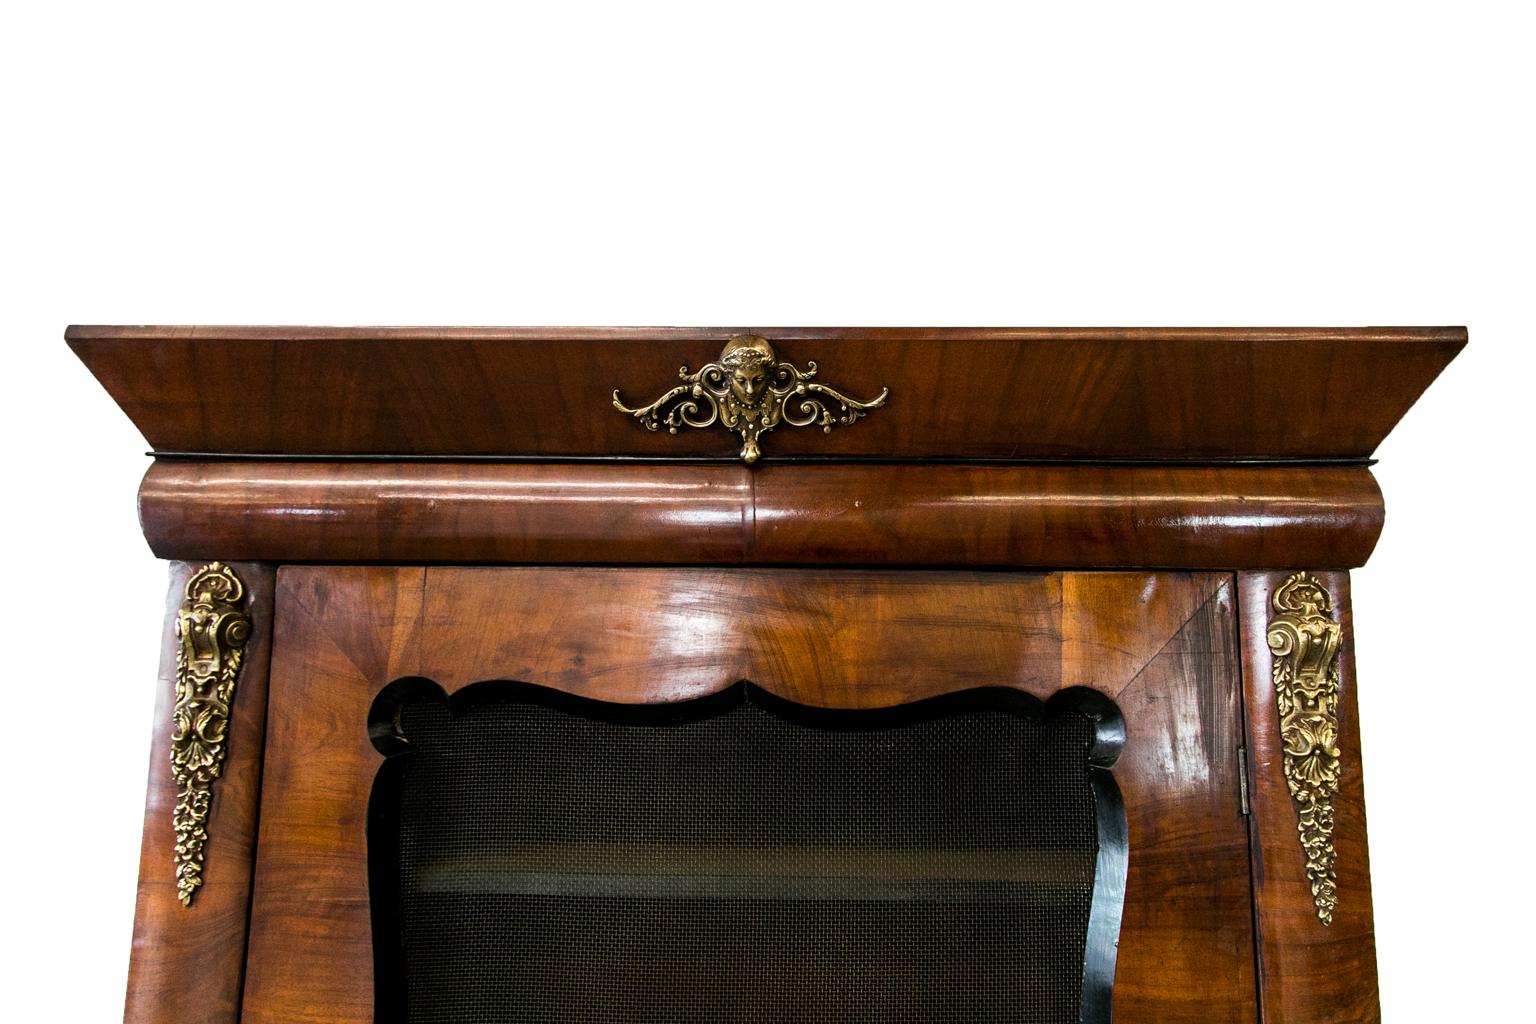 This French walnut bookcase has a wire mesh door with beveled ebonized scalloped framing. The stiles and frieze have convex banding in heavy cast brass ornamentation, four interior shelves. The stiles terminate in ebonized scroll feet. It has the